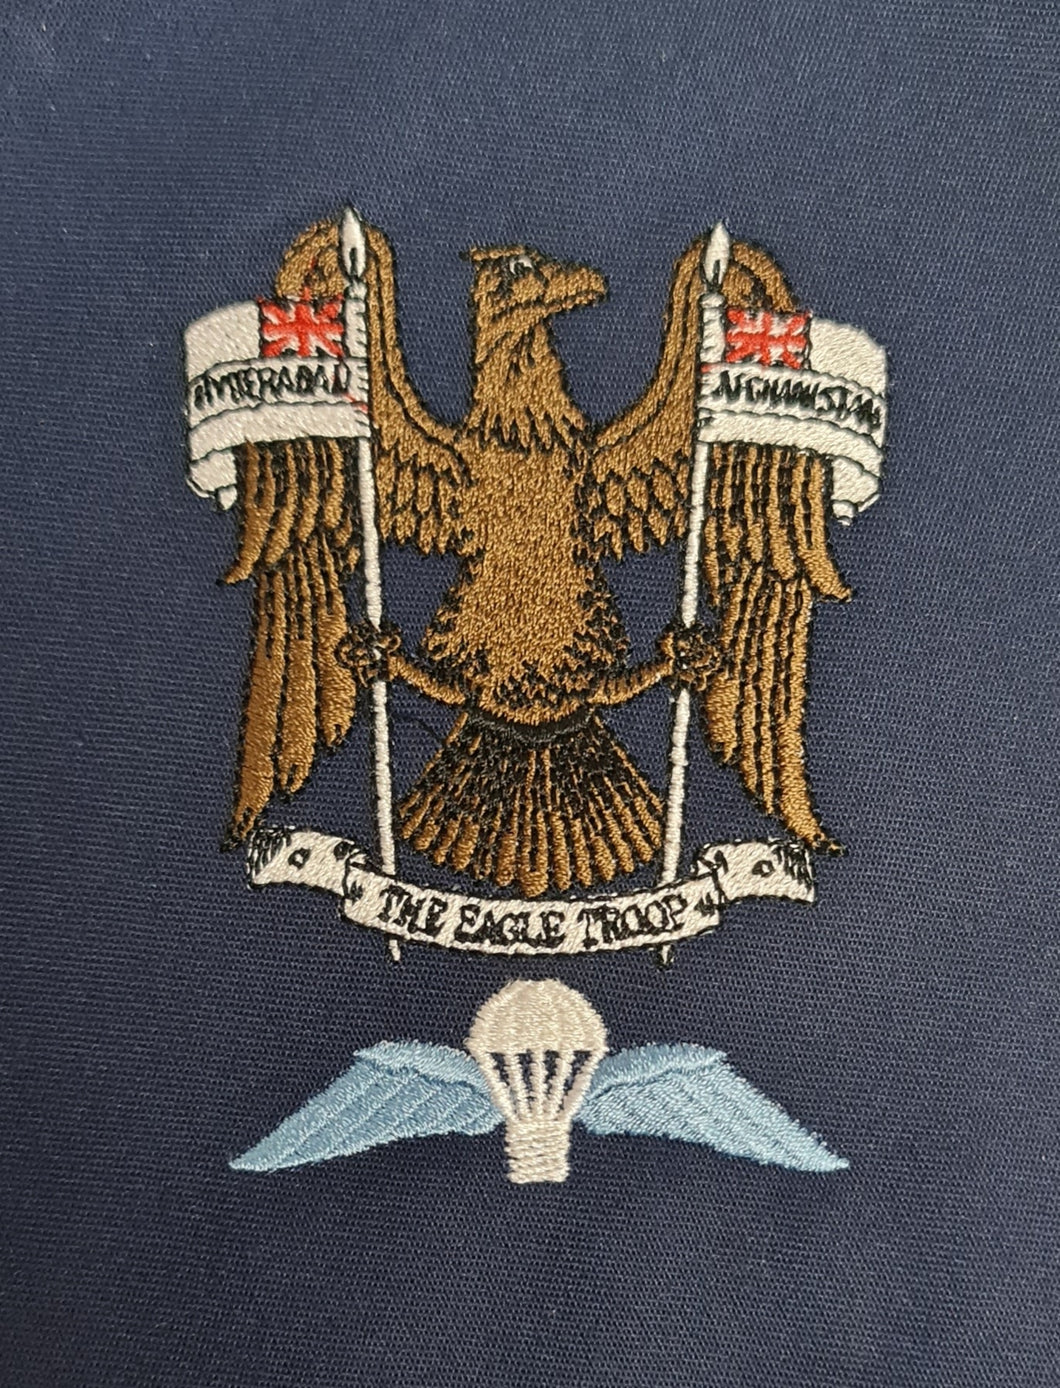 N (Para) Bty 'The Eagle Troop' & Wings 7 RHA  - Embroidered Design - Choose your Garment